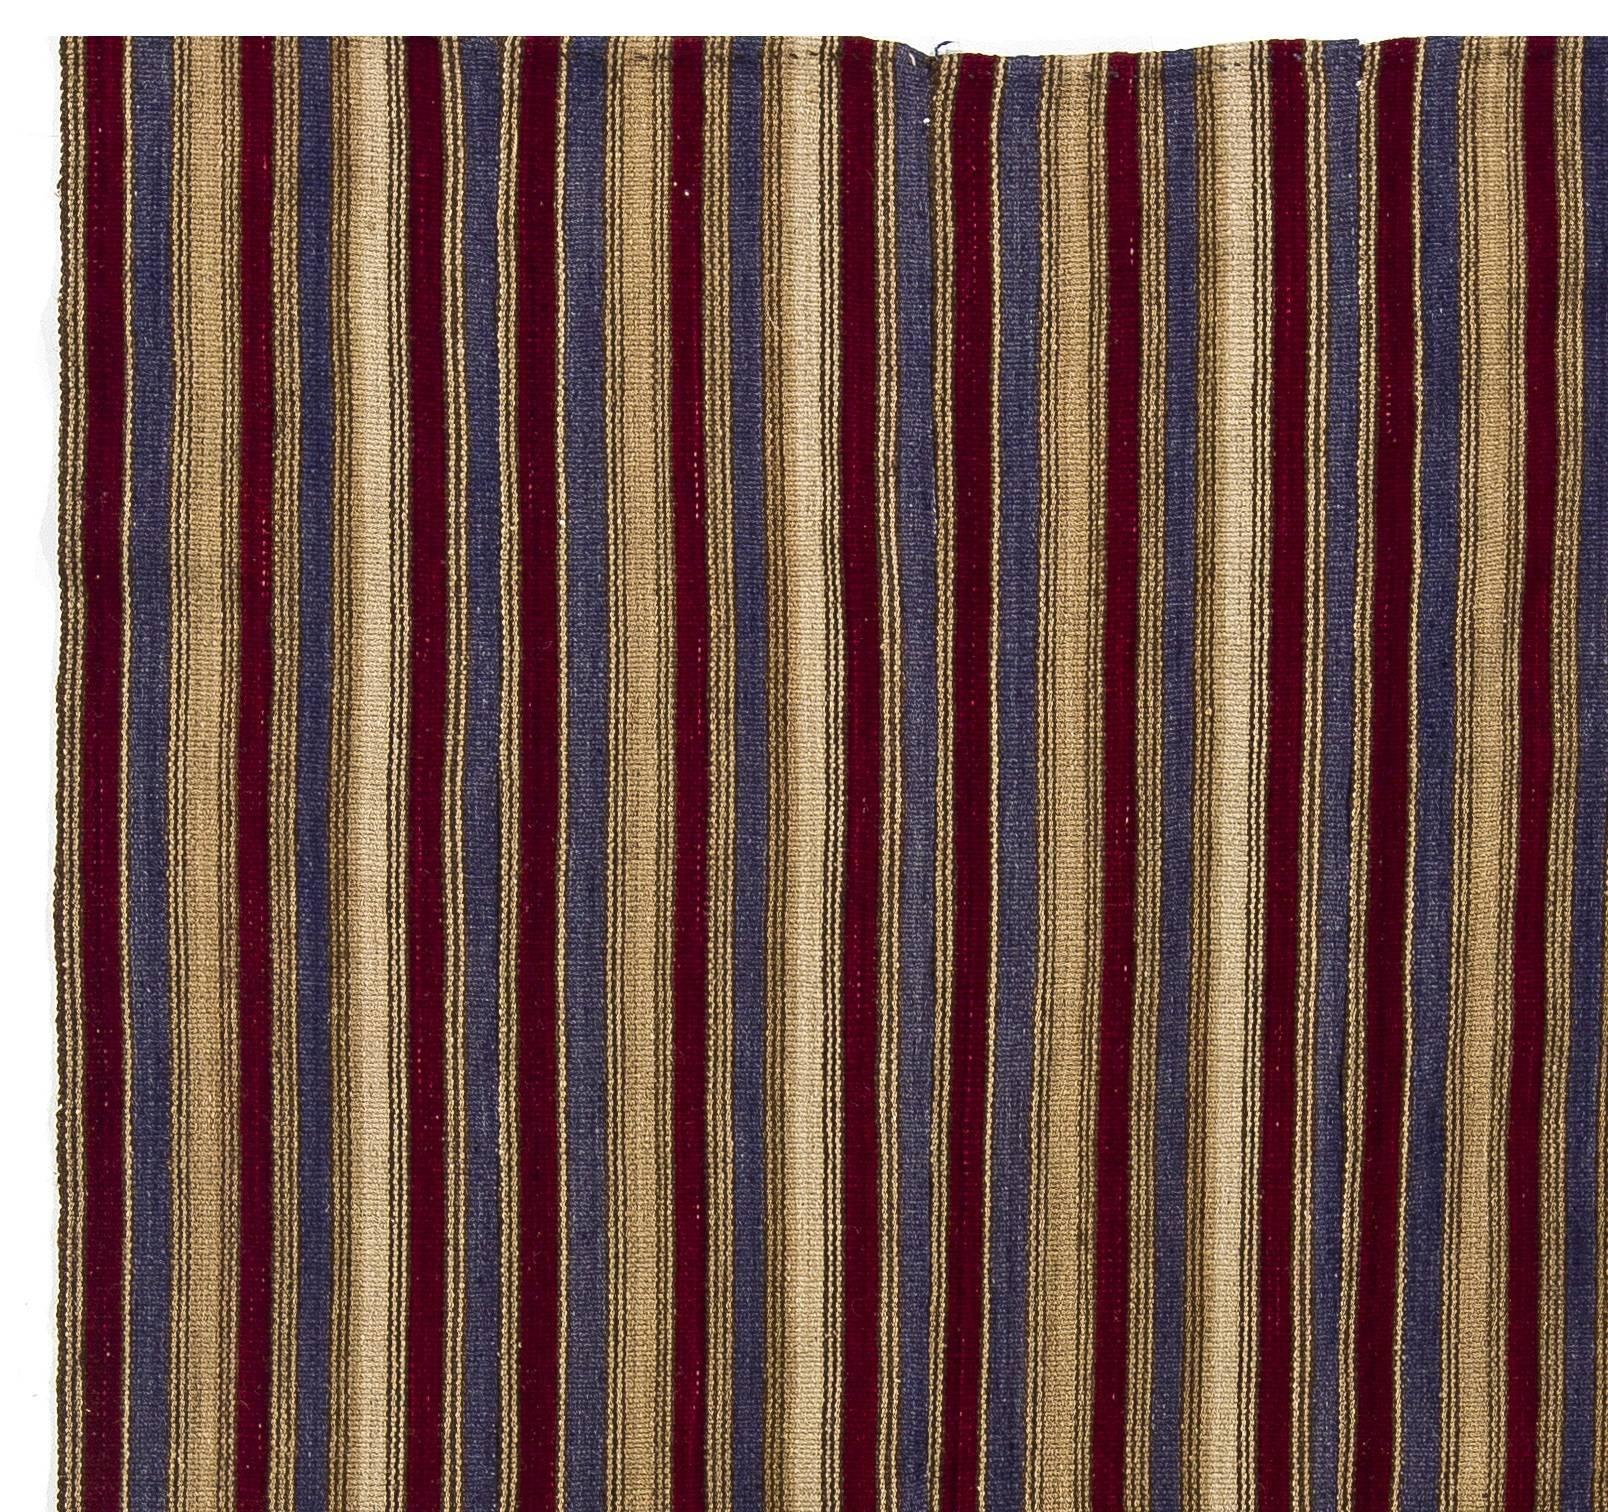 Turkish 4.5x8.7 Ft Vintage Handwoven Anatolian Kilim Rug with Vertical Bands, All Wool For Sale